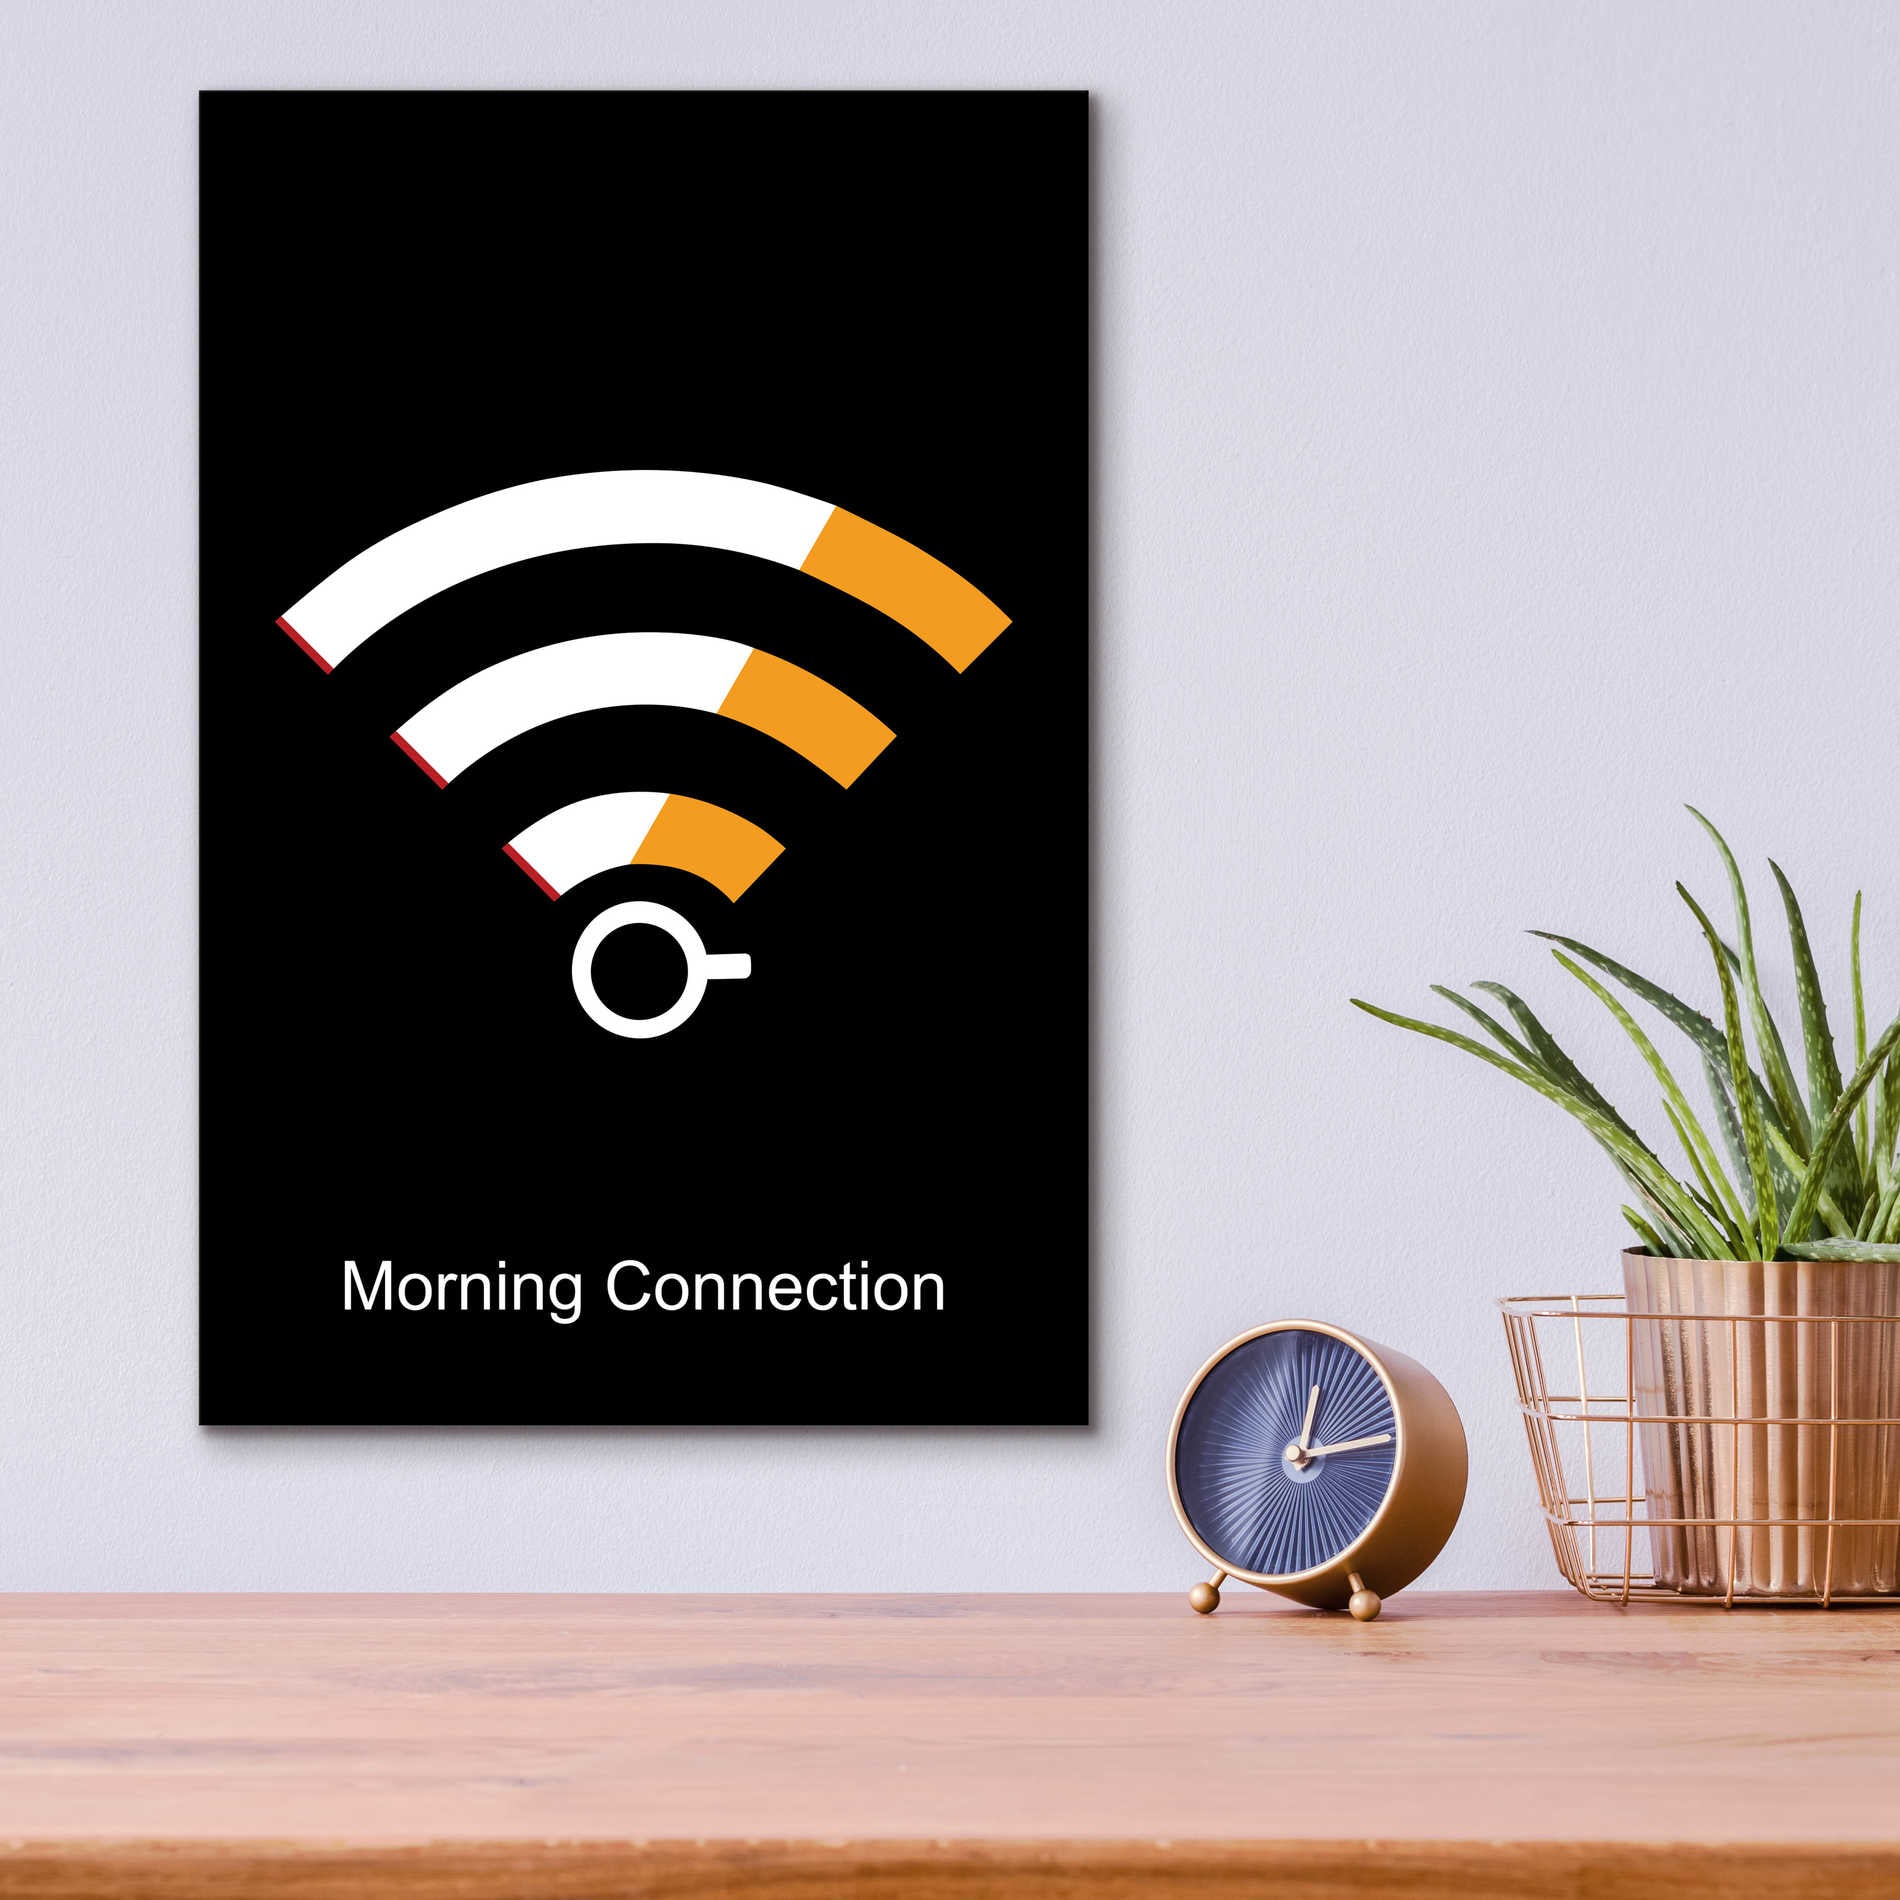 Epic Art 'Morning Connection' by Cesare Bellassai, Acrylic Glass Wall Art,12x16